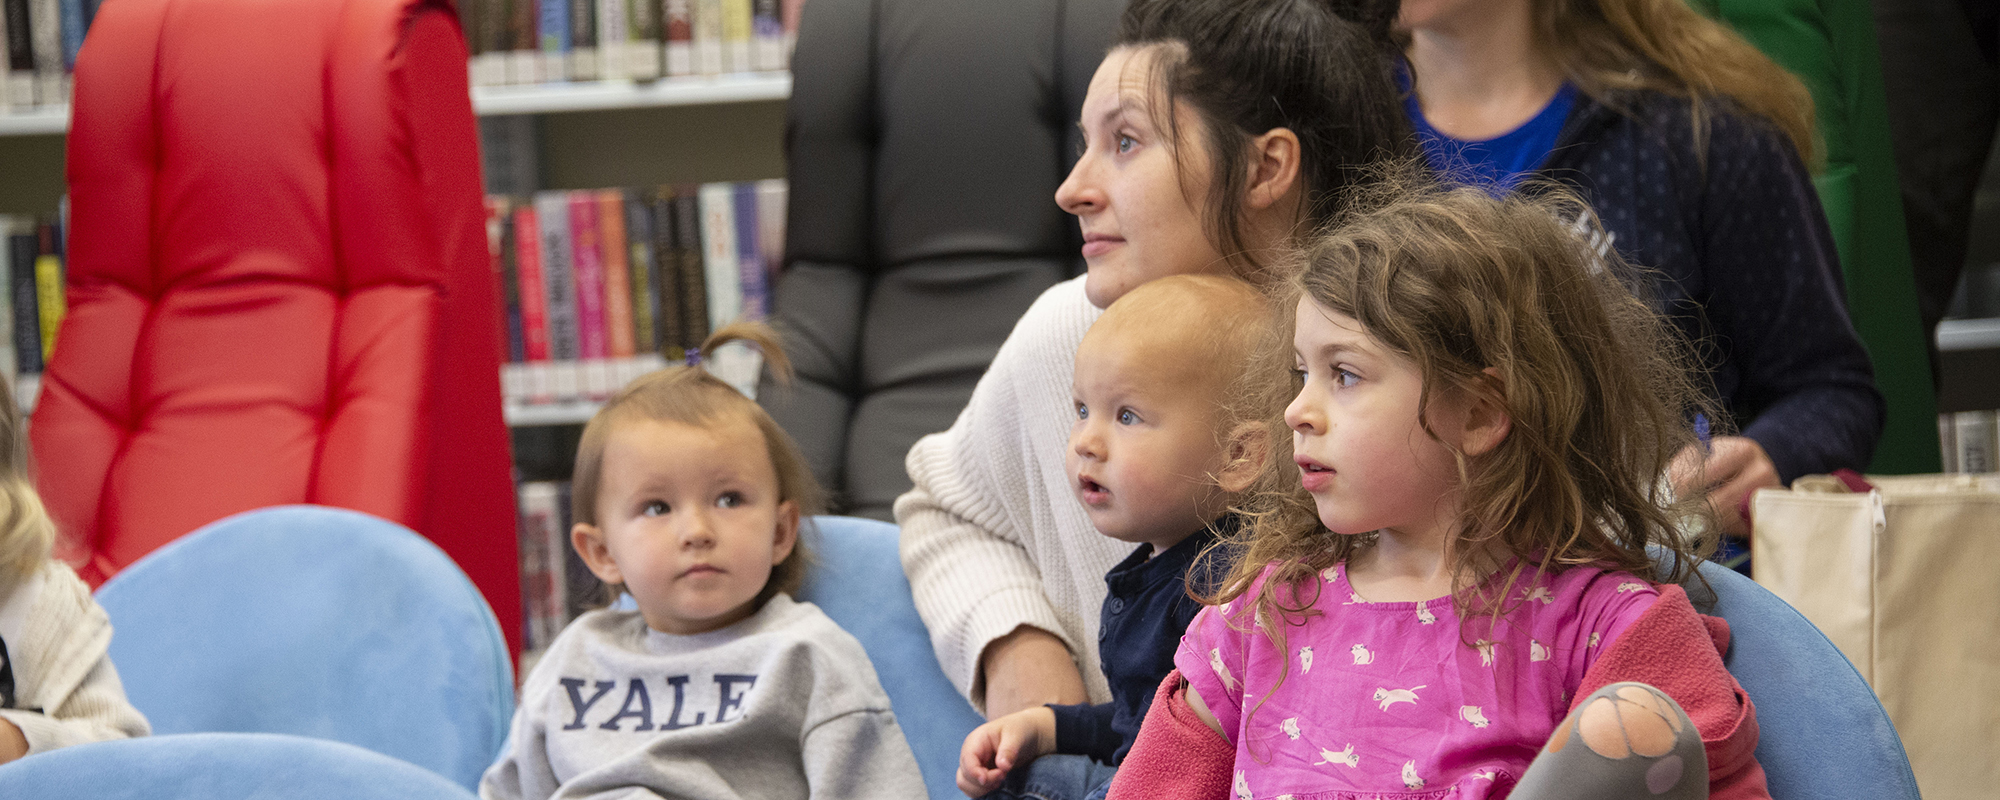 small children listen intently to storytime